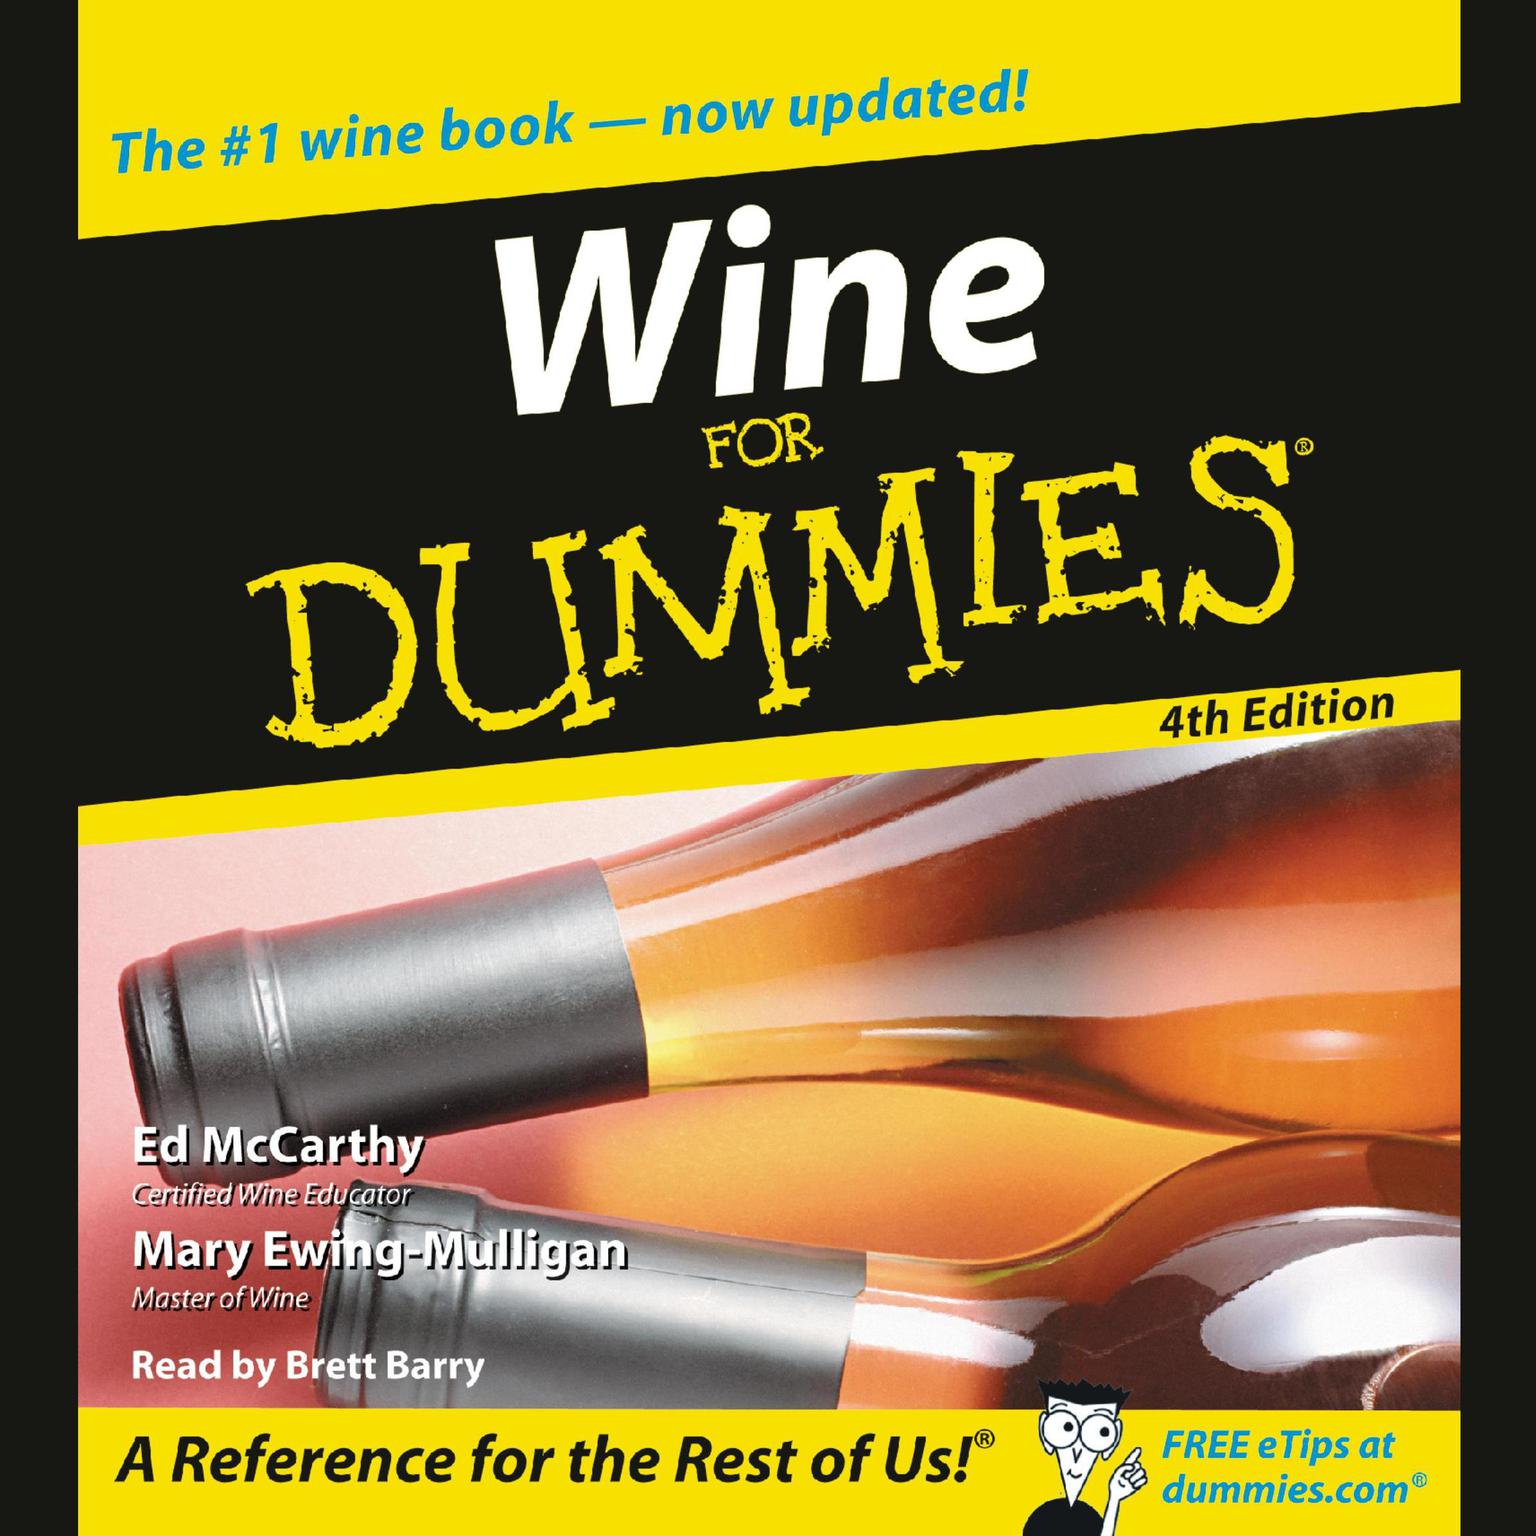 Wine for Dummies 4th Edition (Abridged) Audiobook, by Ed McCarthy